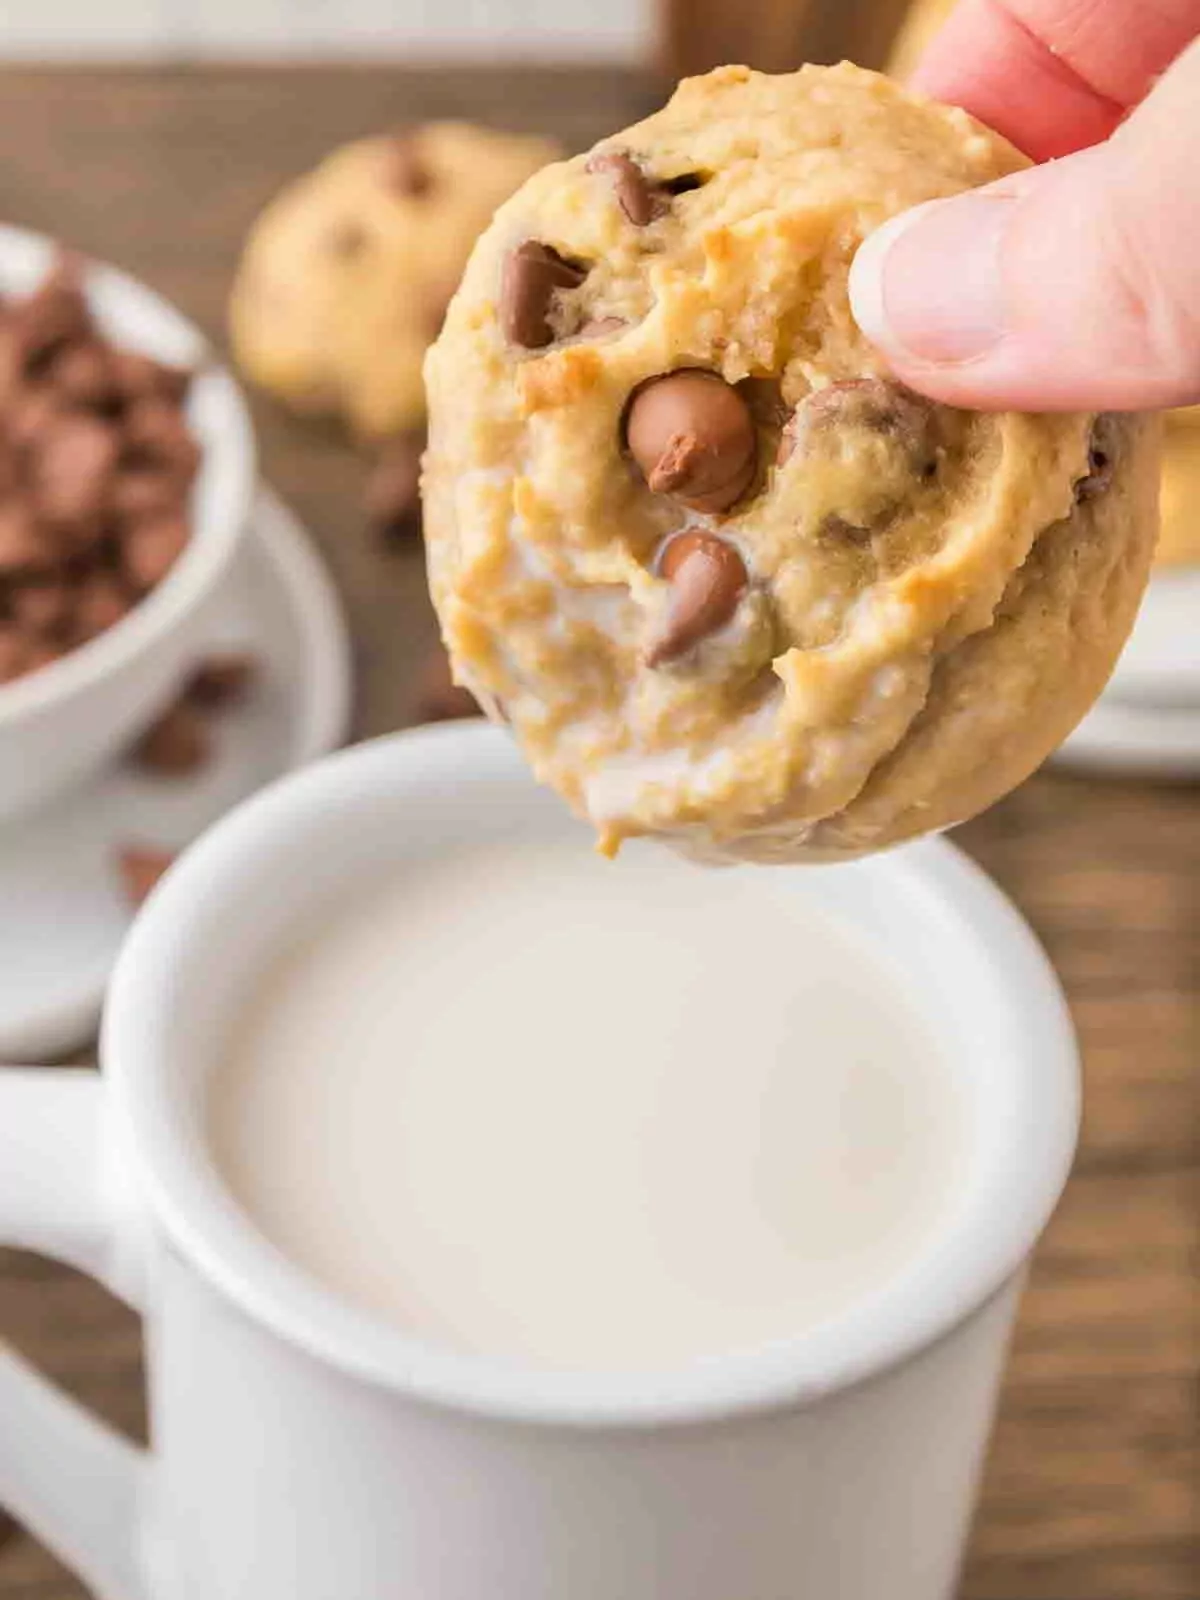 Chocolate chip cookie being dunked into a mug of milk.